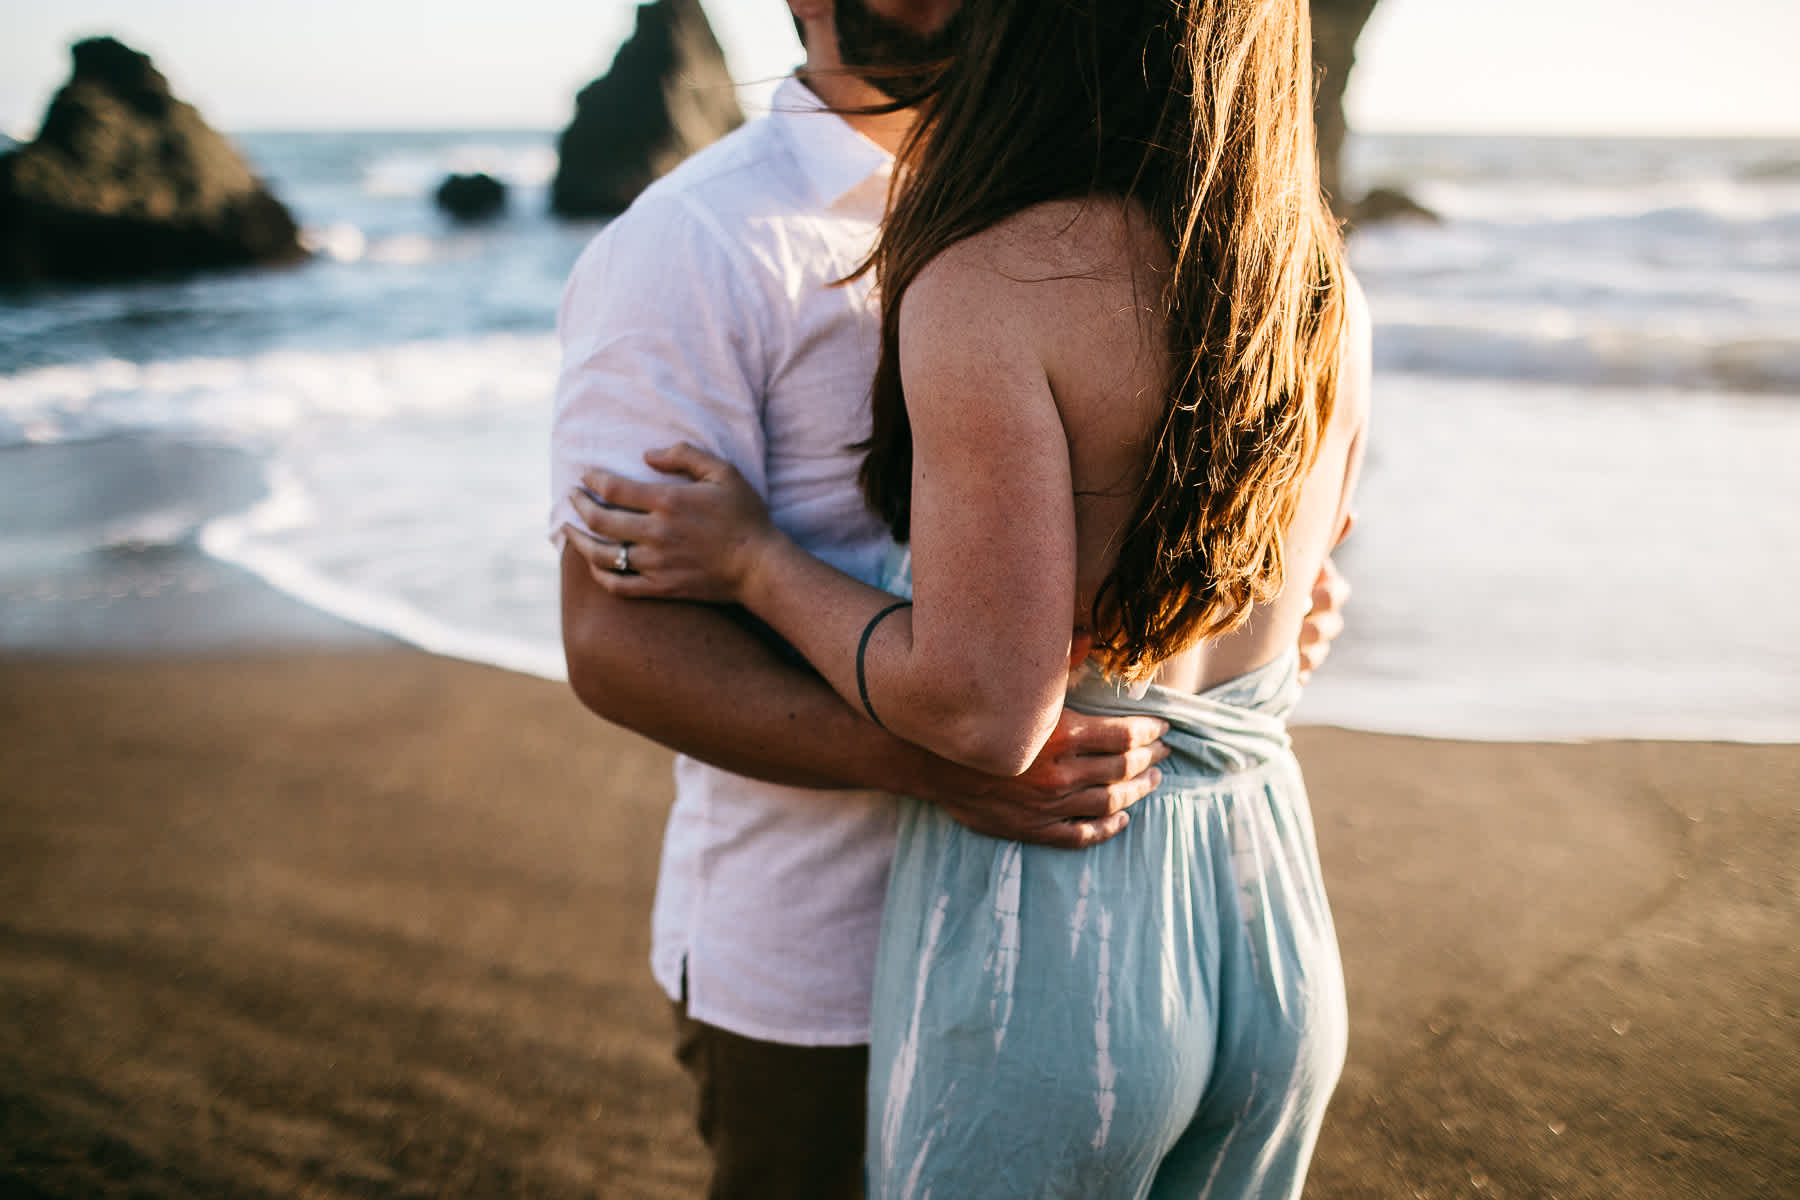 marin-headlands-rodeo-beach-lifestyle-laughter-engagement-session-30